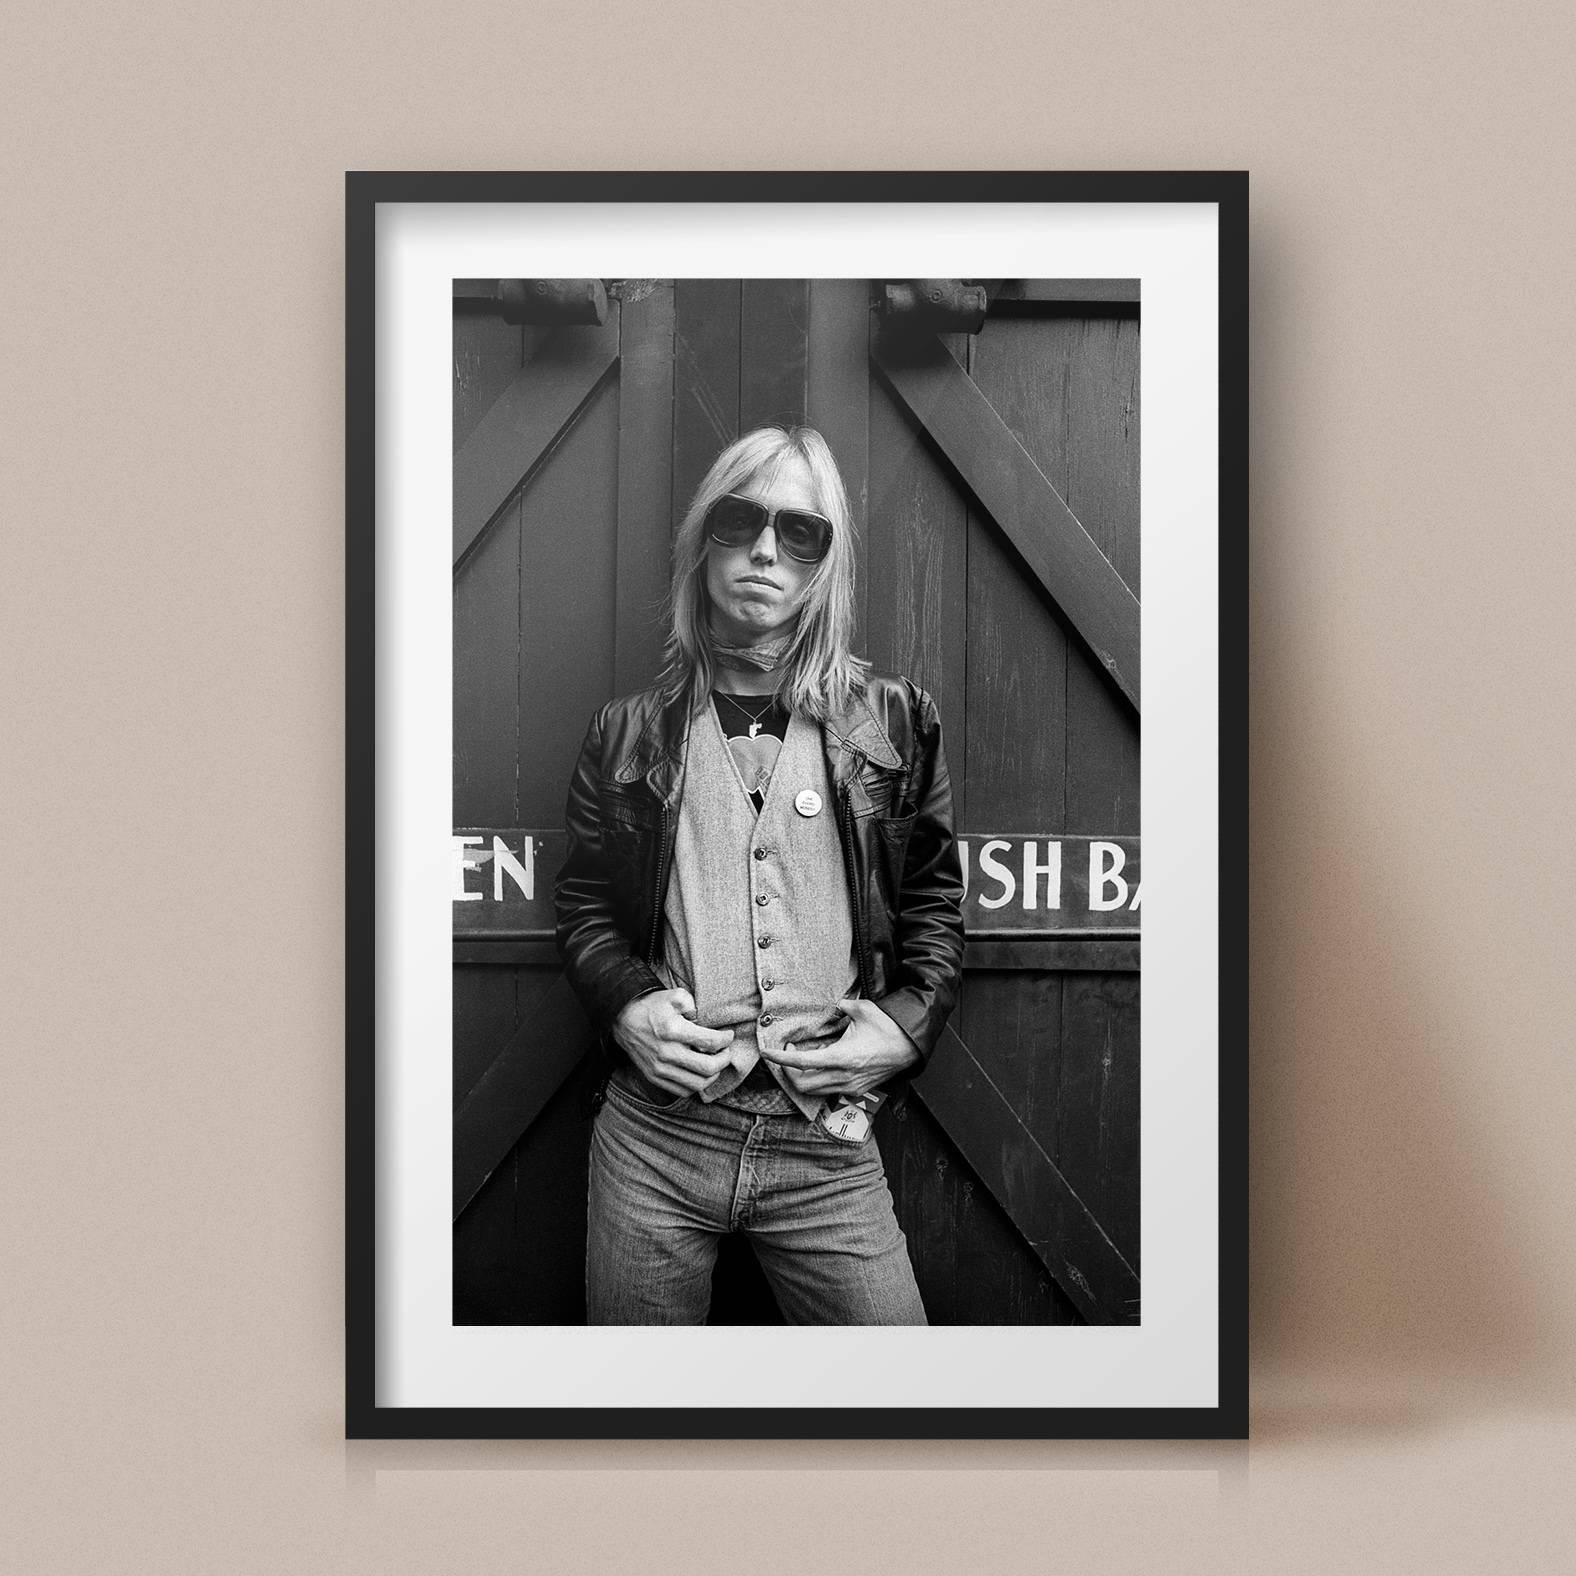 Tom Petty photographed behind the San Francisco studio Tom Petty and the Heartbreakers were using in 1979. 

17 x 21 inches
Edition of 25

Adrian Boot, one of Britain’s best known music photographers, began his career in the early 1970’s freelancing